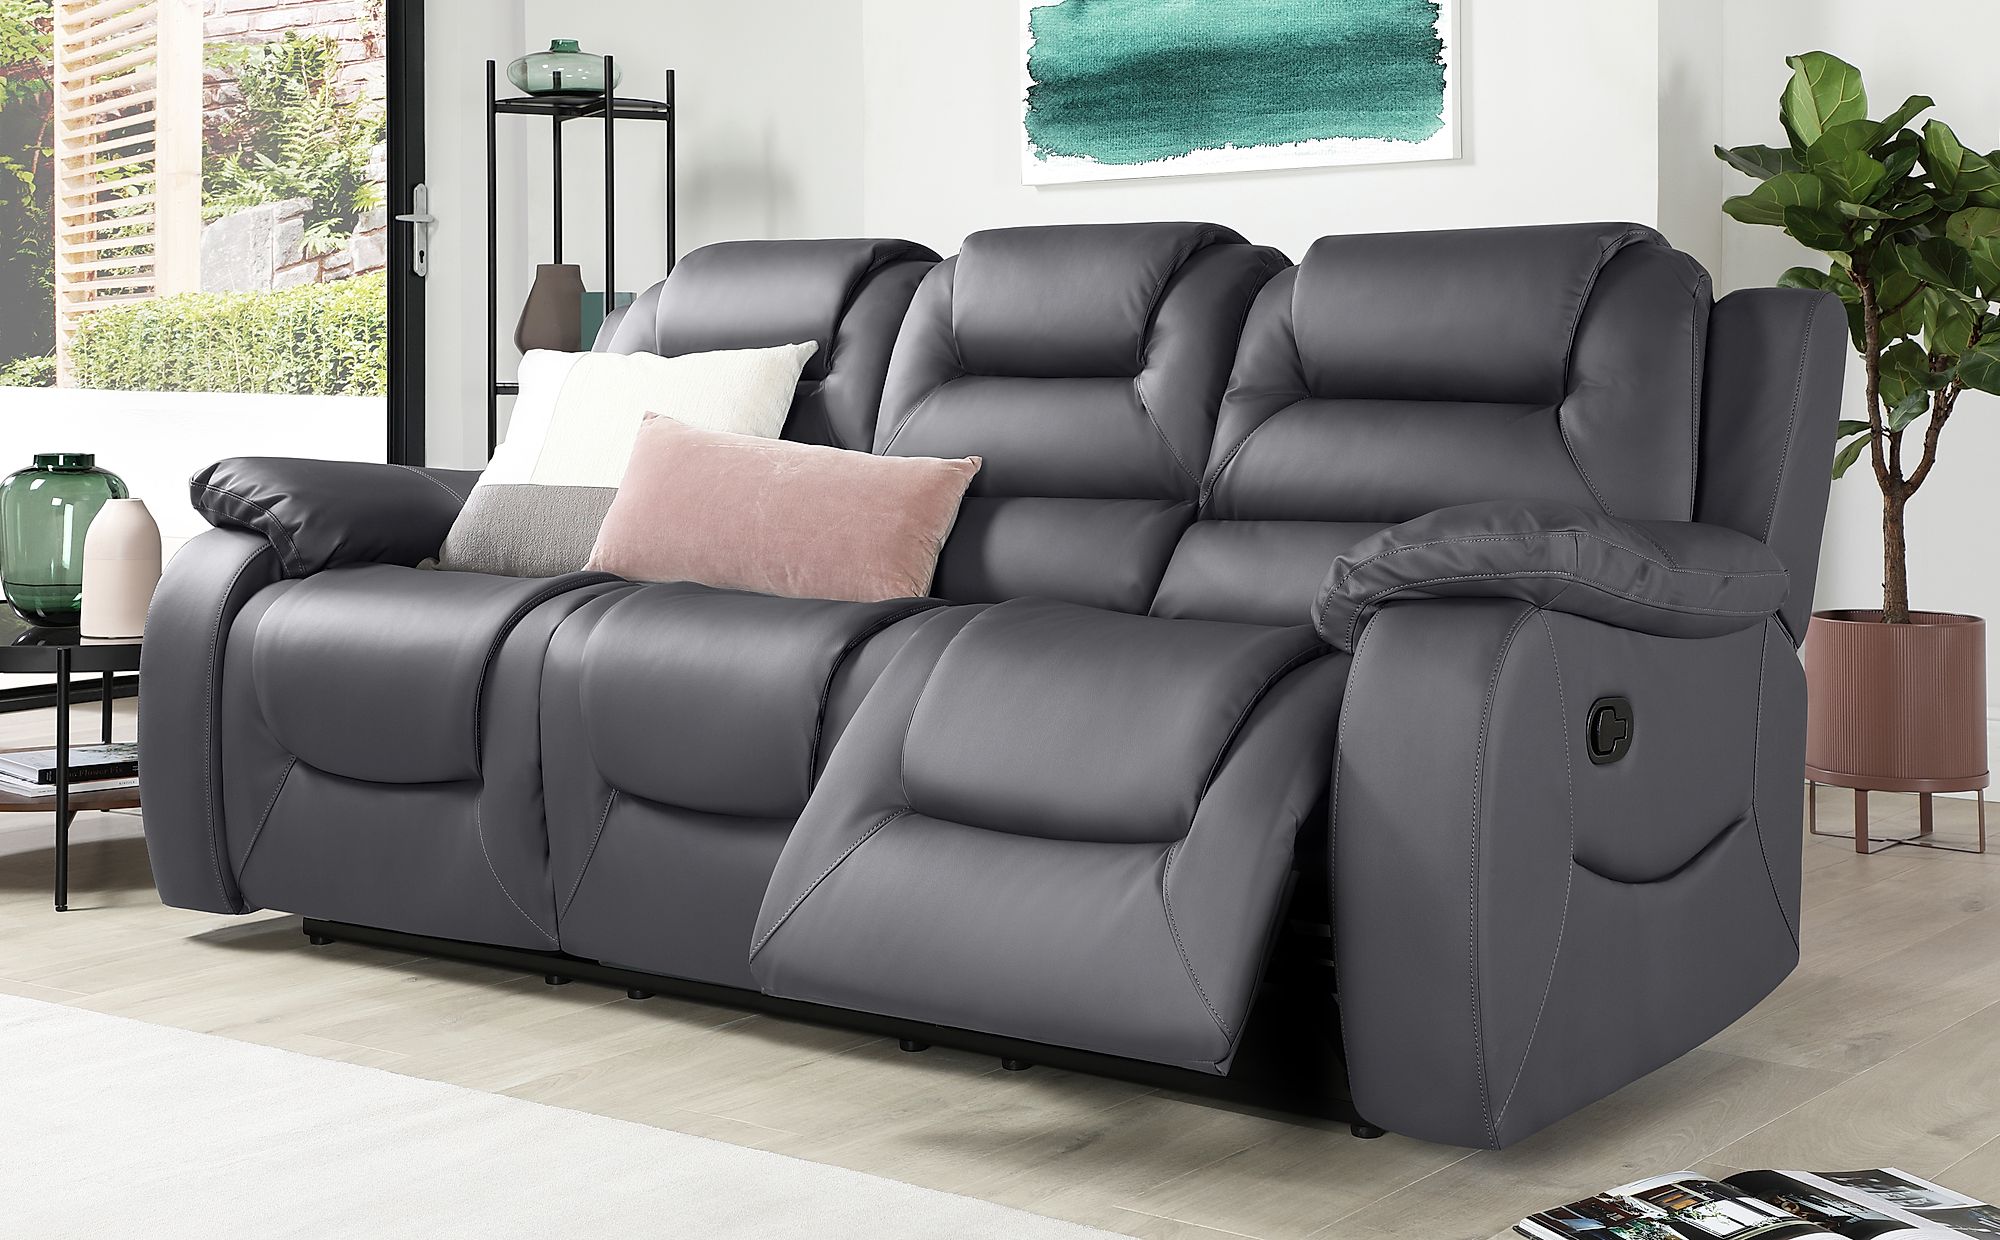 Vancouver Grey Leather 3 Seater Recliner Sofa | Furniture ...